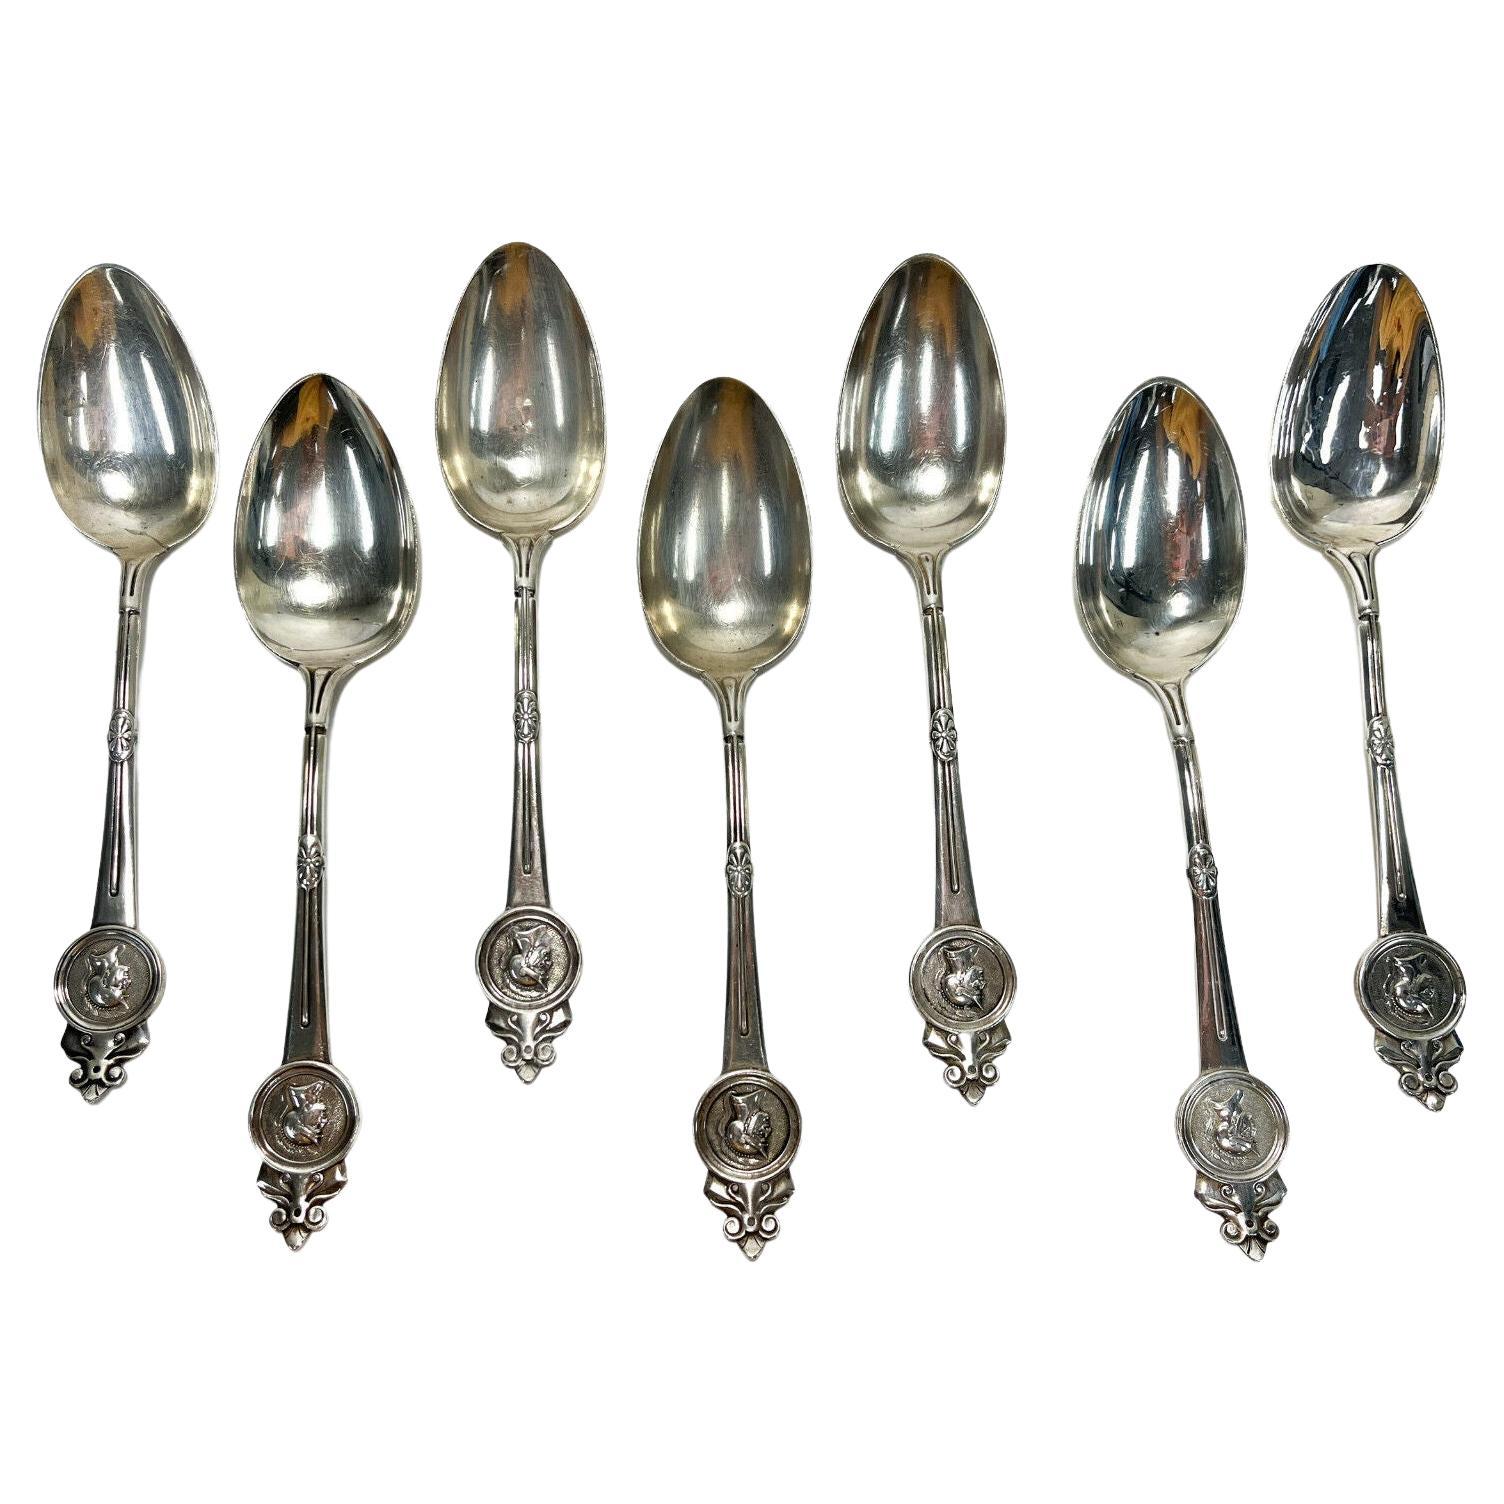  7 Gorham Sterling Silver Medallion 8.5 inch Tablespoons, Late 19th Century 